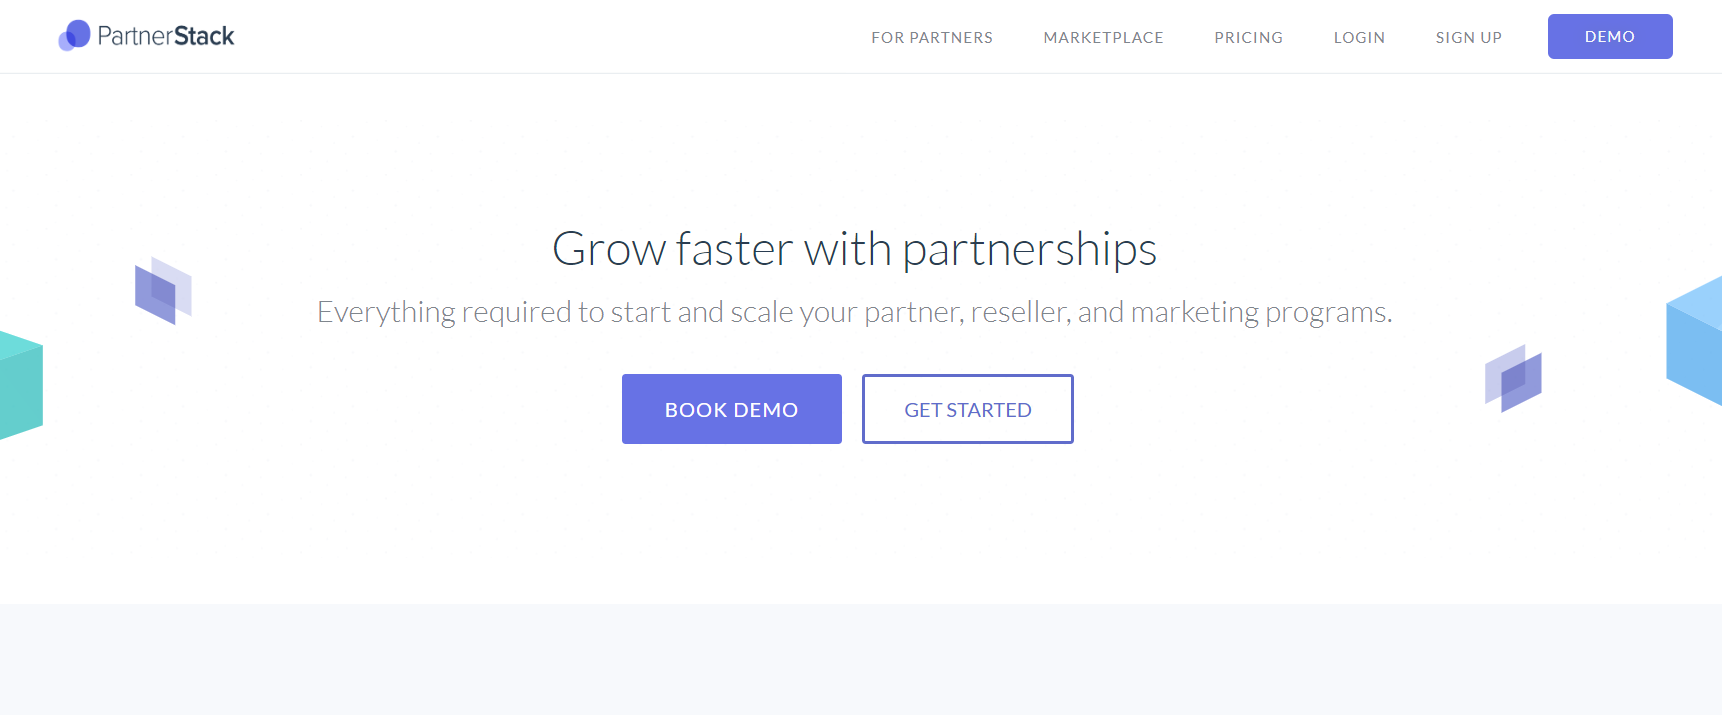  PartnerStack Overview- Build Distribution Channels That Work